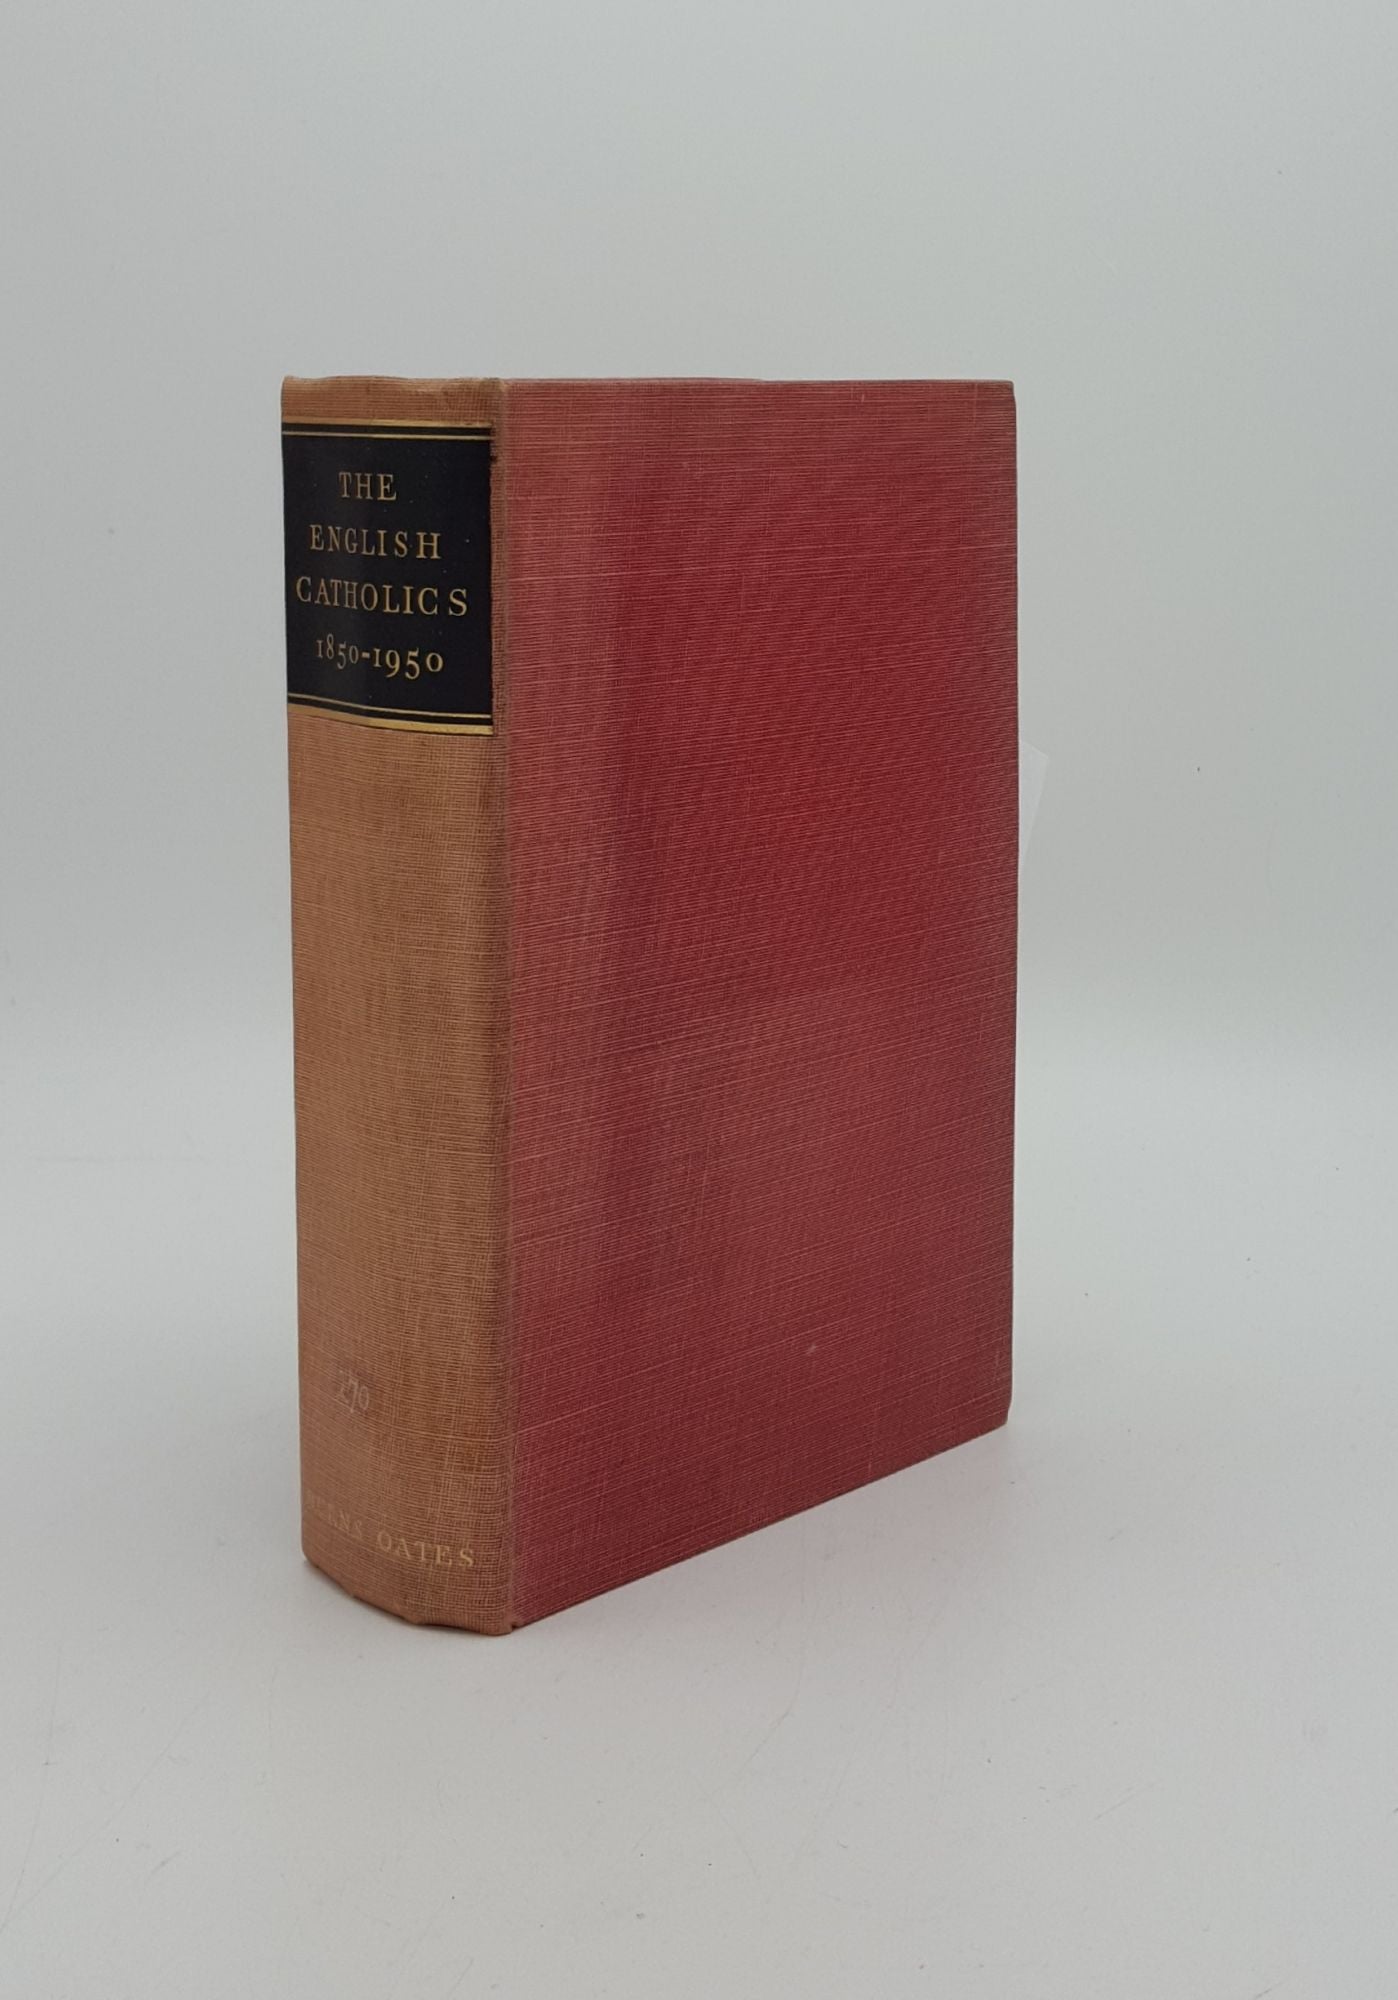 BECK George Andrew - The English Catholics 1850-1950 Essays to Commemerate the Centenary of the Restoration of the Hierarchy of England and Wales